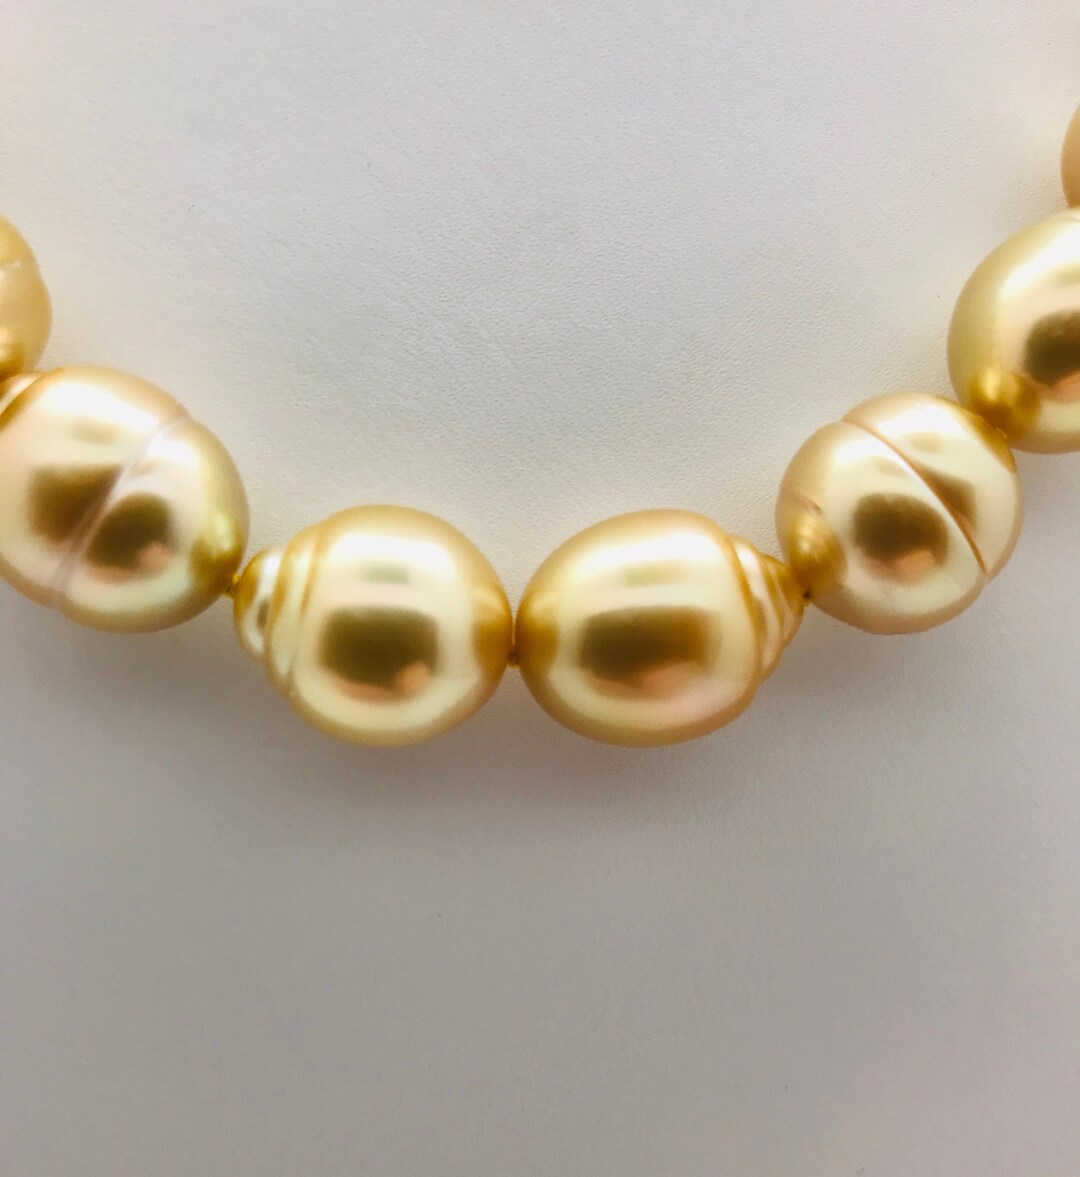 10-12mm Light Golden South Sea Pearl Necklace Strands – Continental Pearl  Loose Pearl, Pearl Necklaces & Jewelry